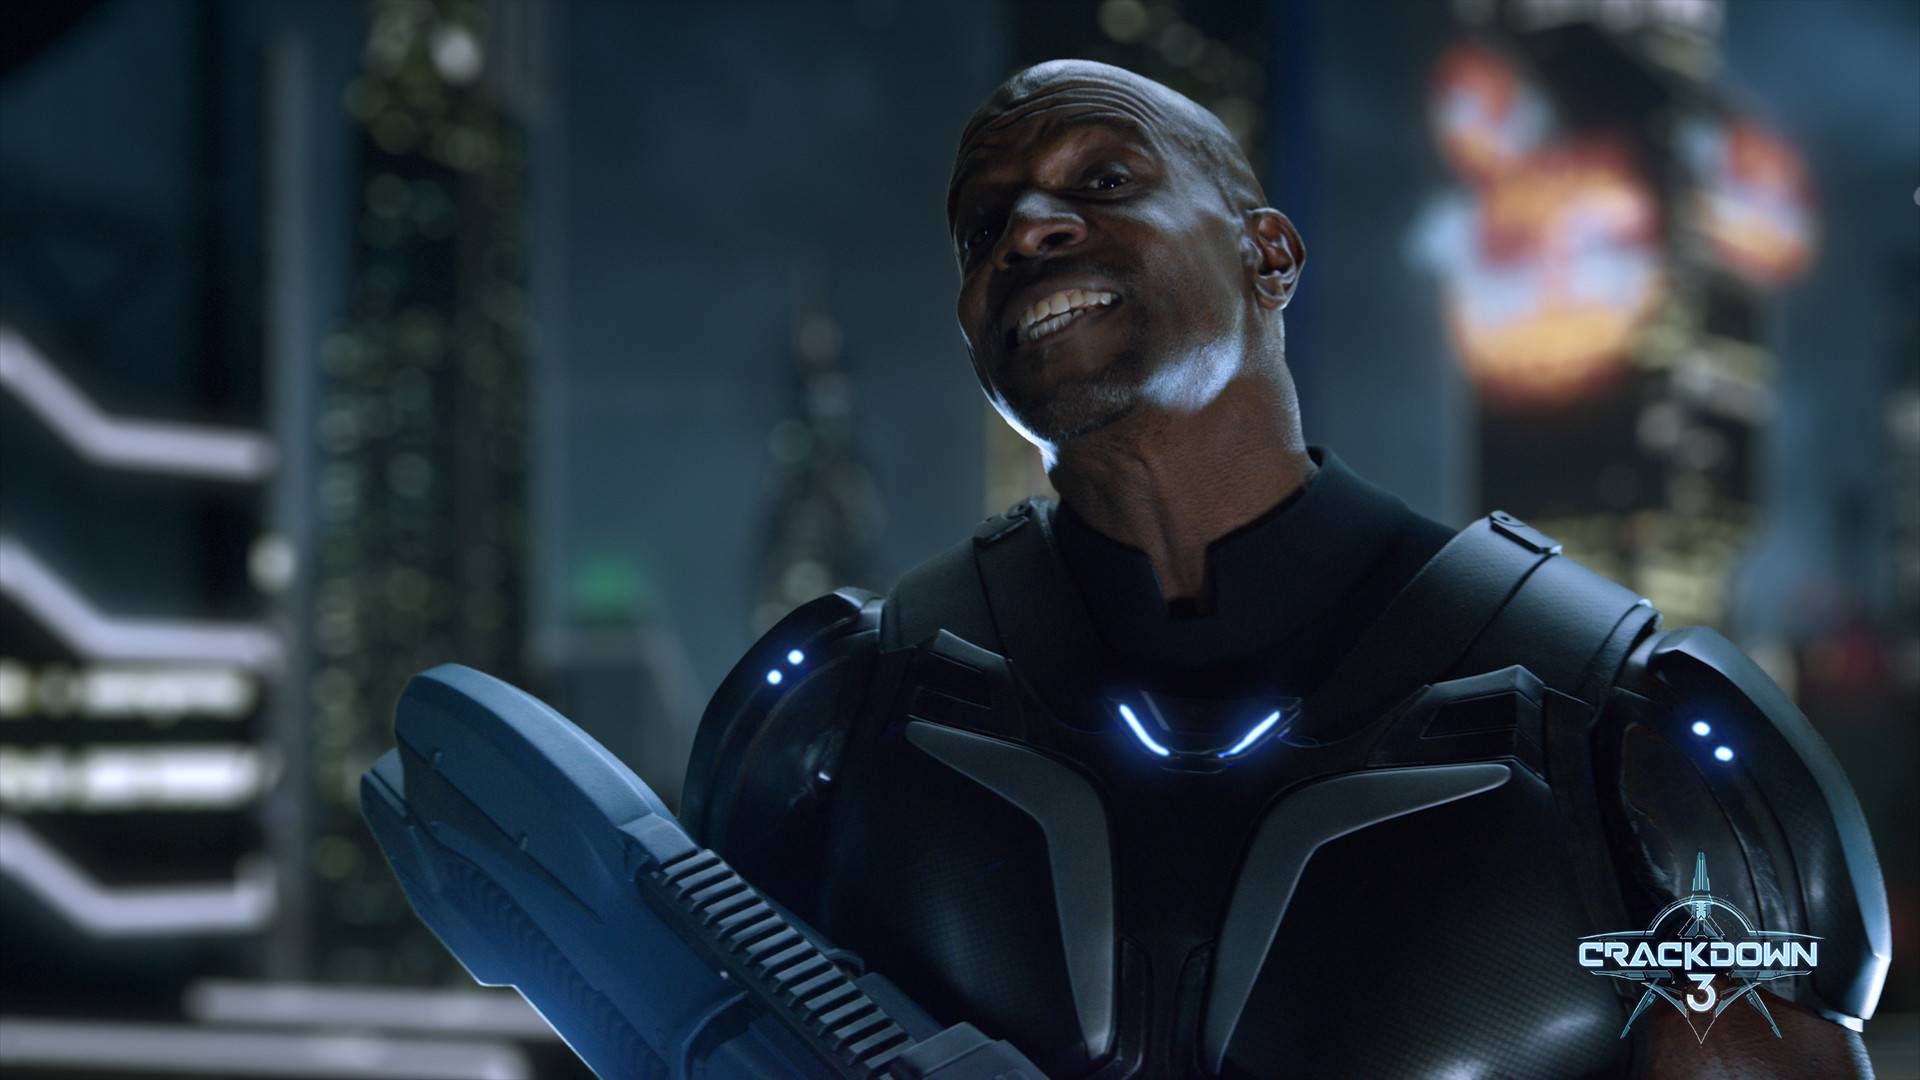 Crackdown 3: Free bonuses available for download now!